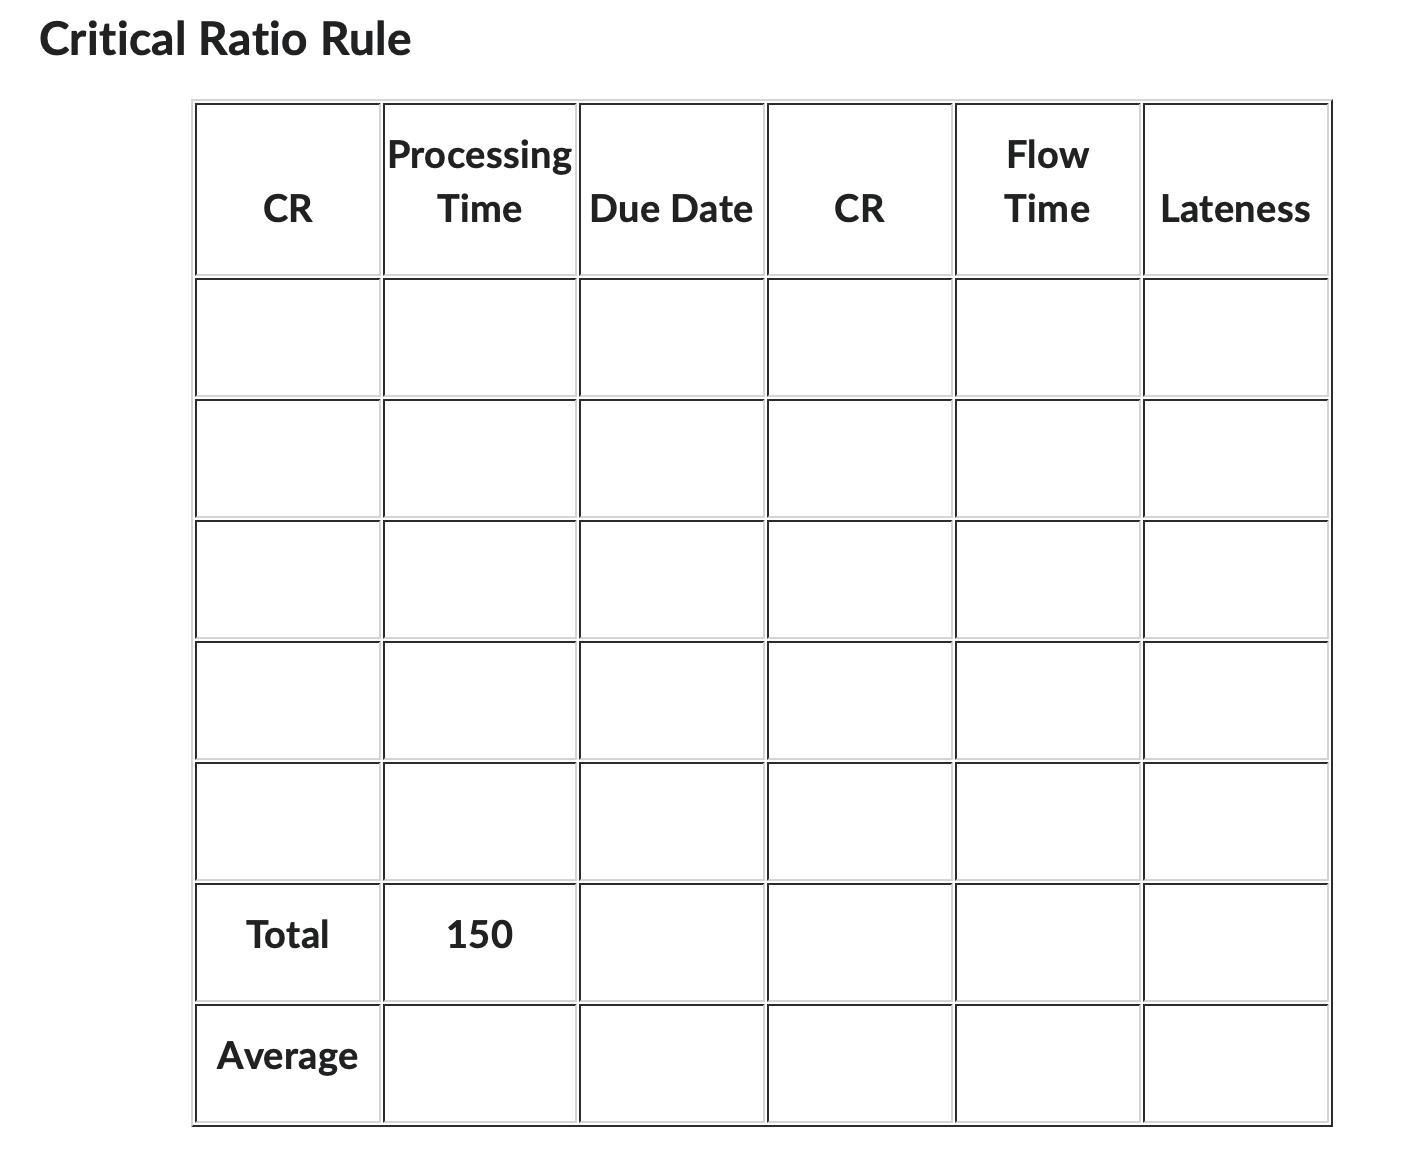 Critical Ratio Rule CR Total Average Processing Time Due Date 150 CR Flow Time Lateness